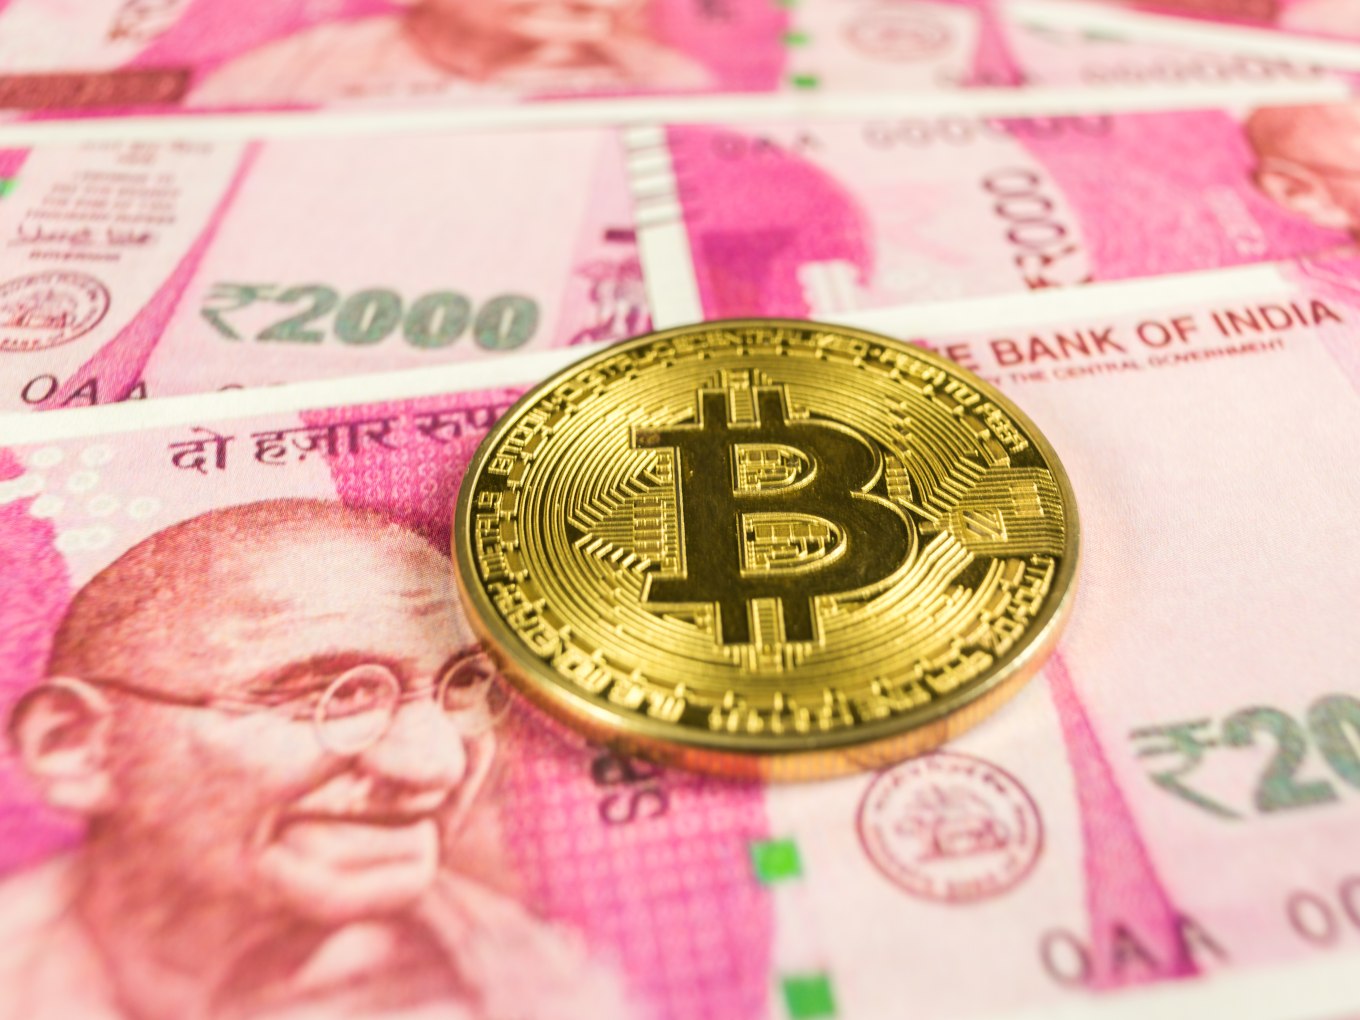 Cryptocurrency Trading In India Time / Bitcoin Drops following Cryptocurrency Trading Crackdown ... / If you can pick the right app for cryptocurrency trading in india, you can trade crypto like bitcoin, ethereum, litecoin, and many more easily dogecoin is currently one of the cryptocurrencies that many analysts consider to be a viable investment option.